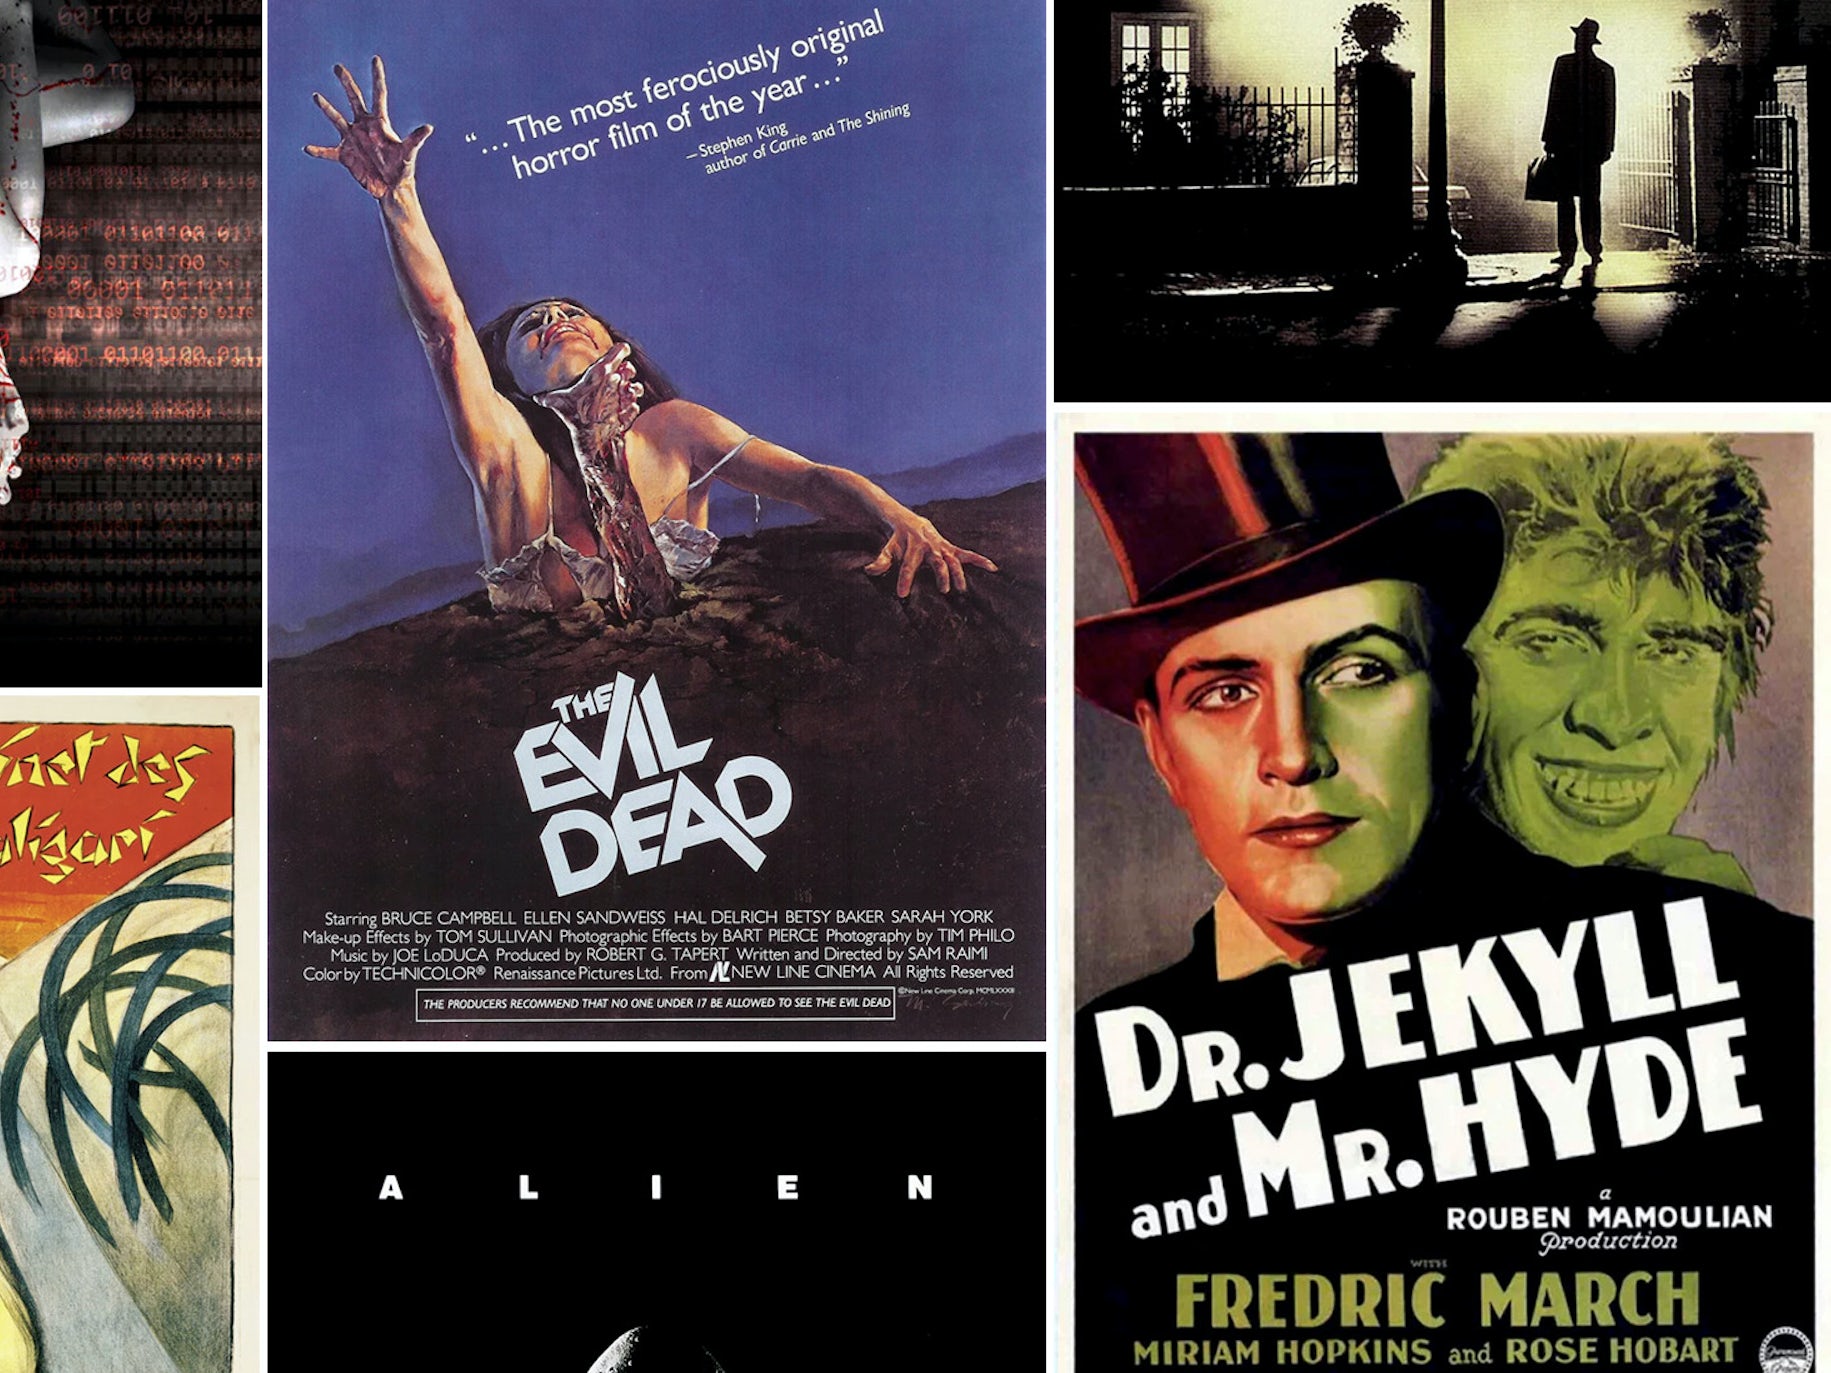 Classic Horror Movie Posters Wallpapers